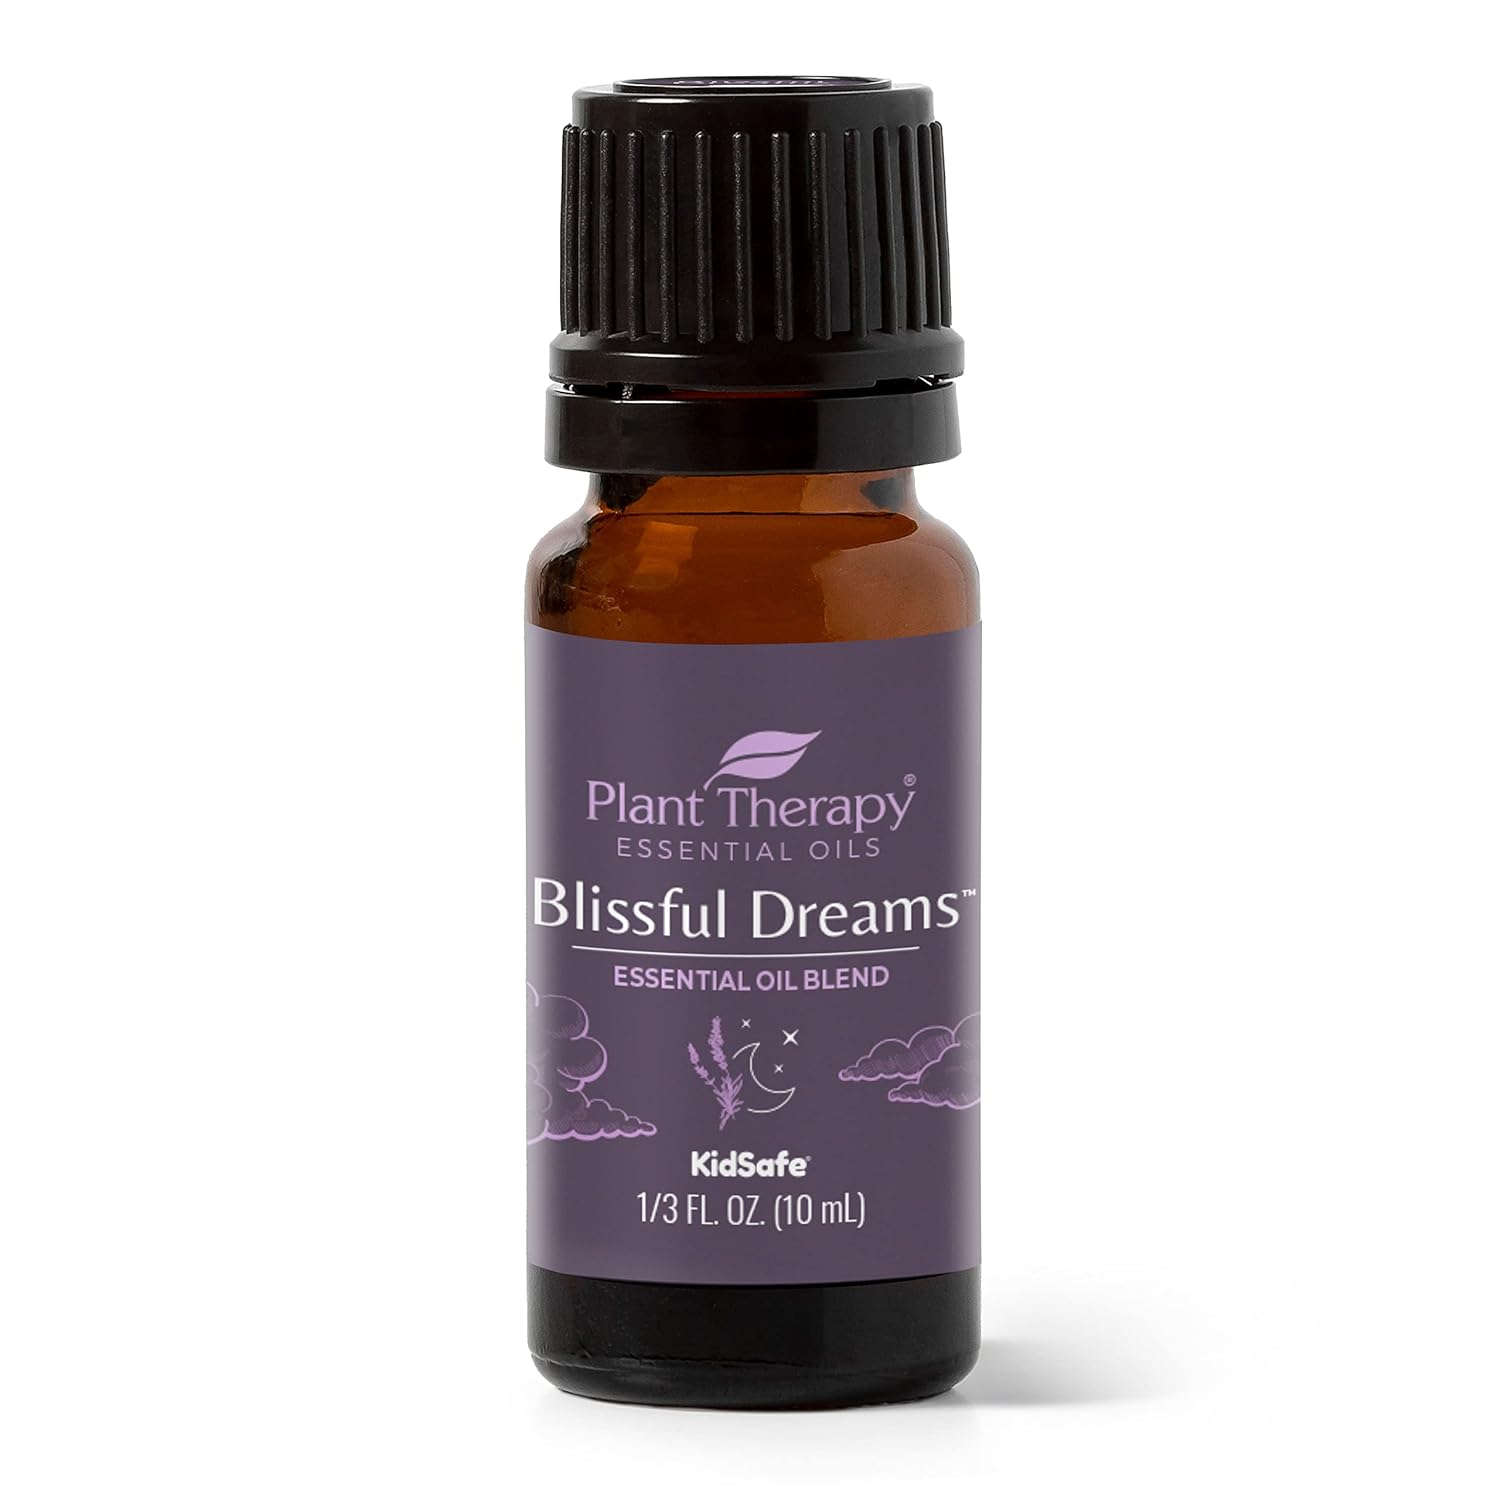 Plant Therapy Blissful Dreams Essential Oil Blend, For Relaxation While Supporting Quality Rest, Grounding and Soothing, Lovely Bedtime Aroma, 10 mL (1/3 oz) 100% Pure, Undiluted, Natural Aromatherapy